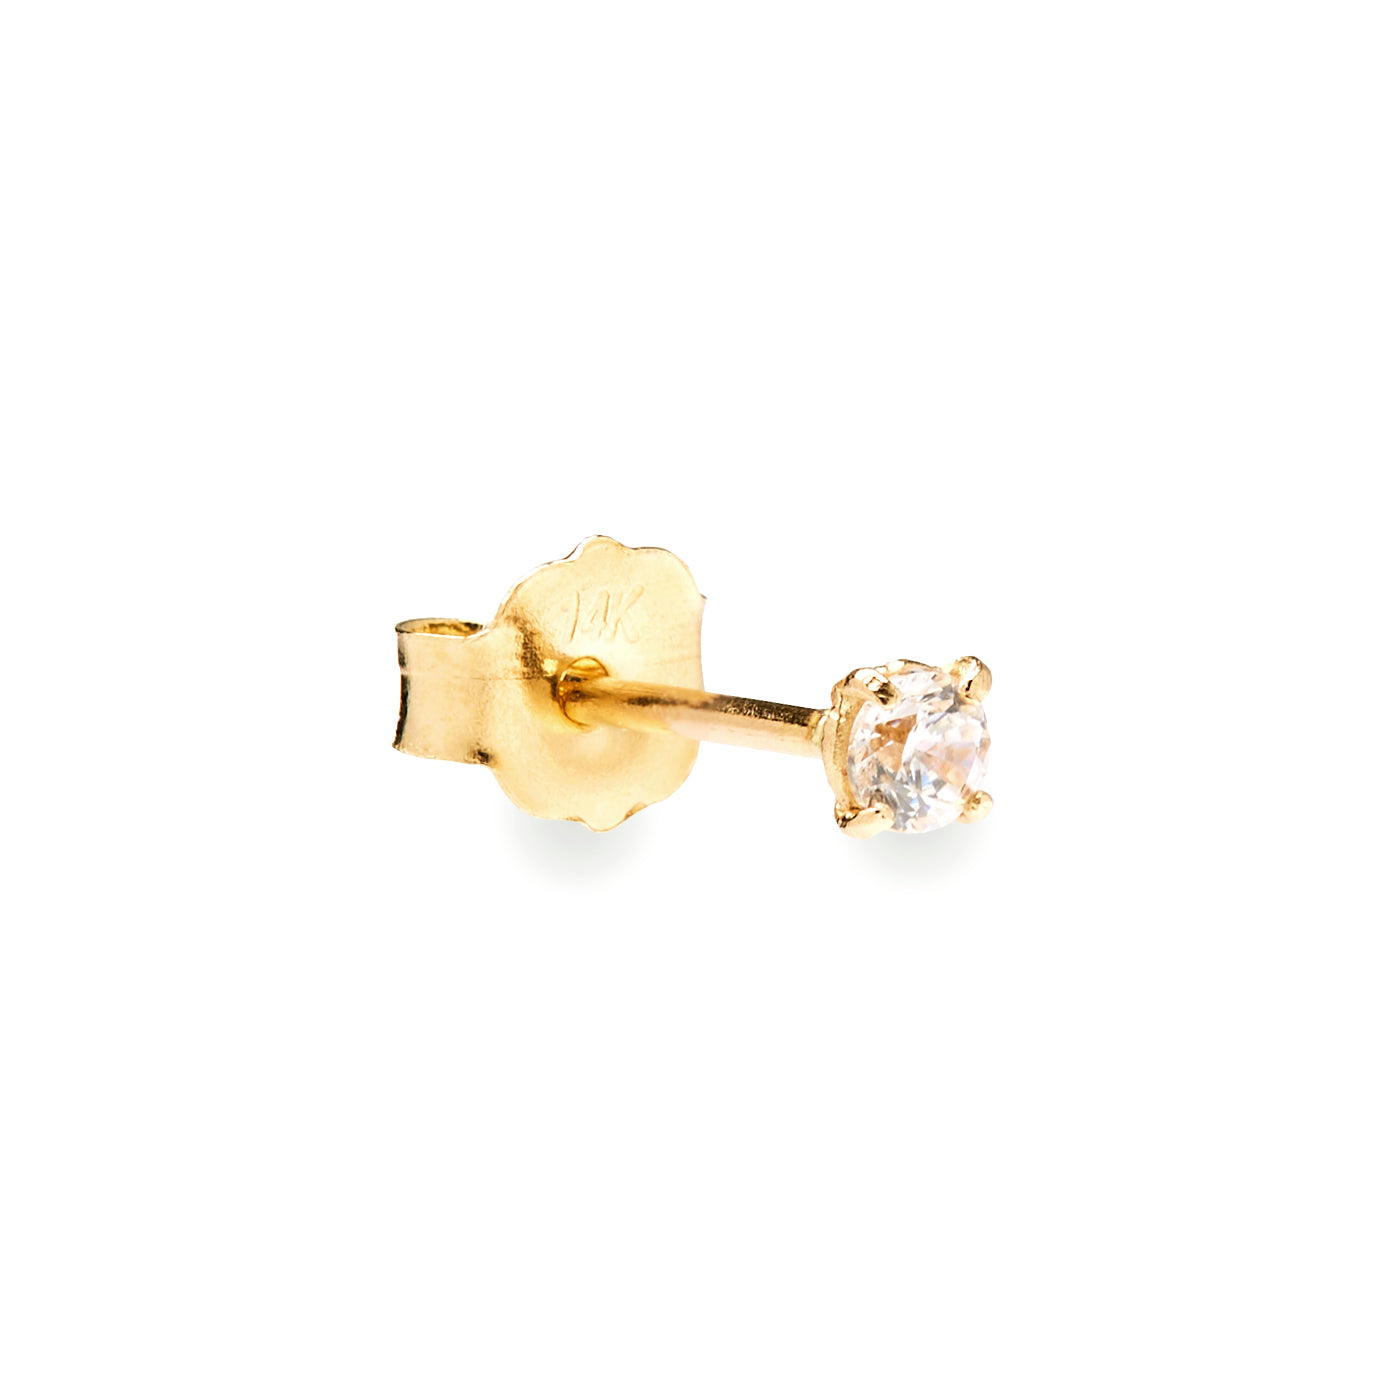 Brilliante tiny 14k solid yellow gold single stud earring with solitaire stone - Helix & Conch